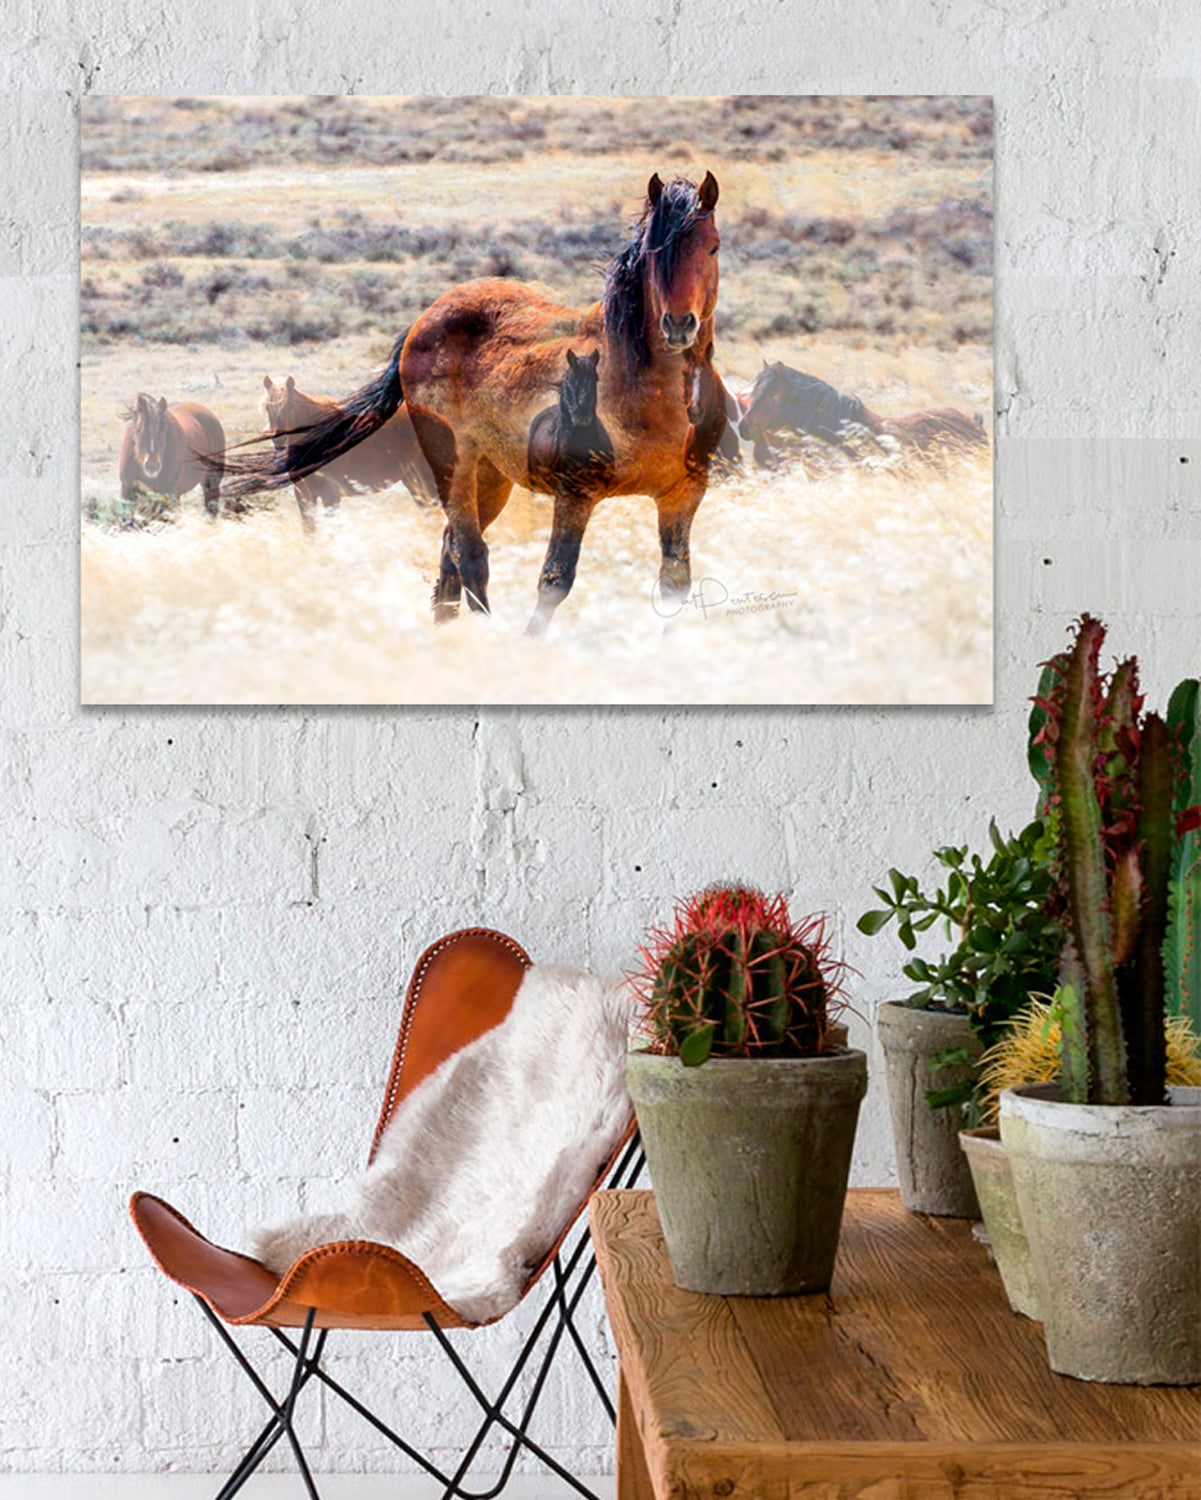 Artistic photographic montage show the spirit of generations of horses  in the wild. Available on Metal or Canvas. Cat Pentescu Photography